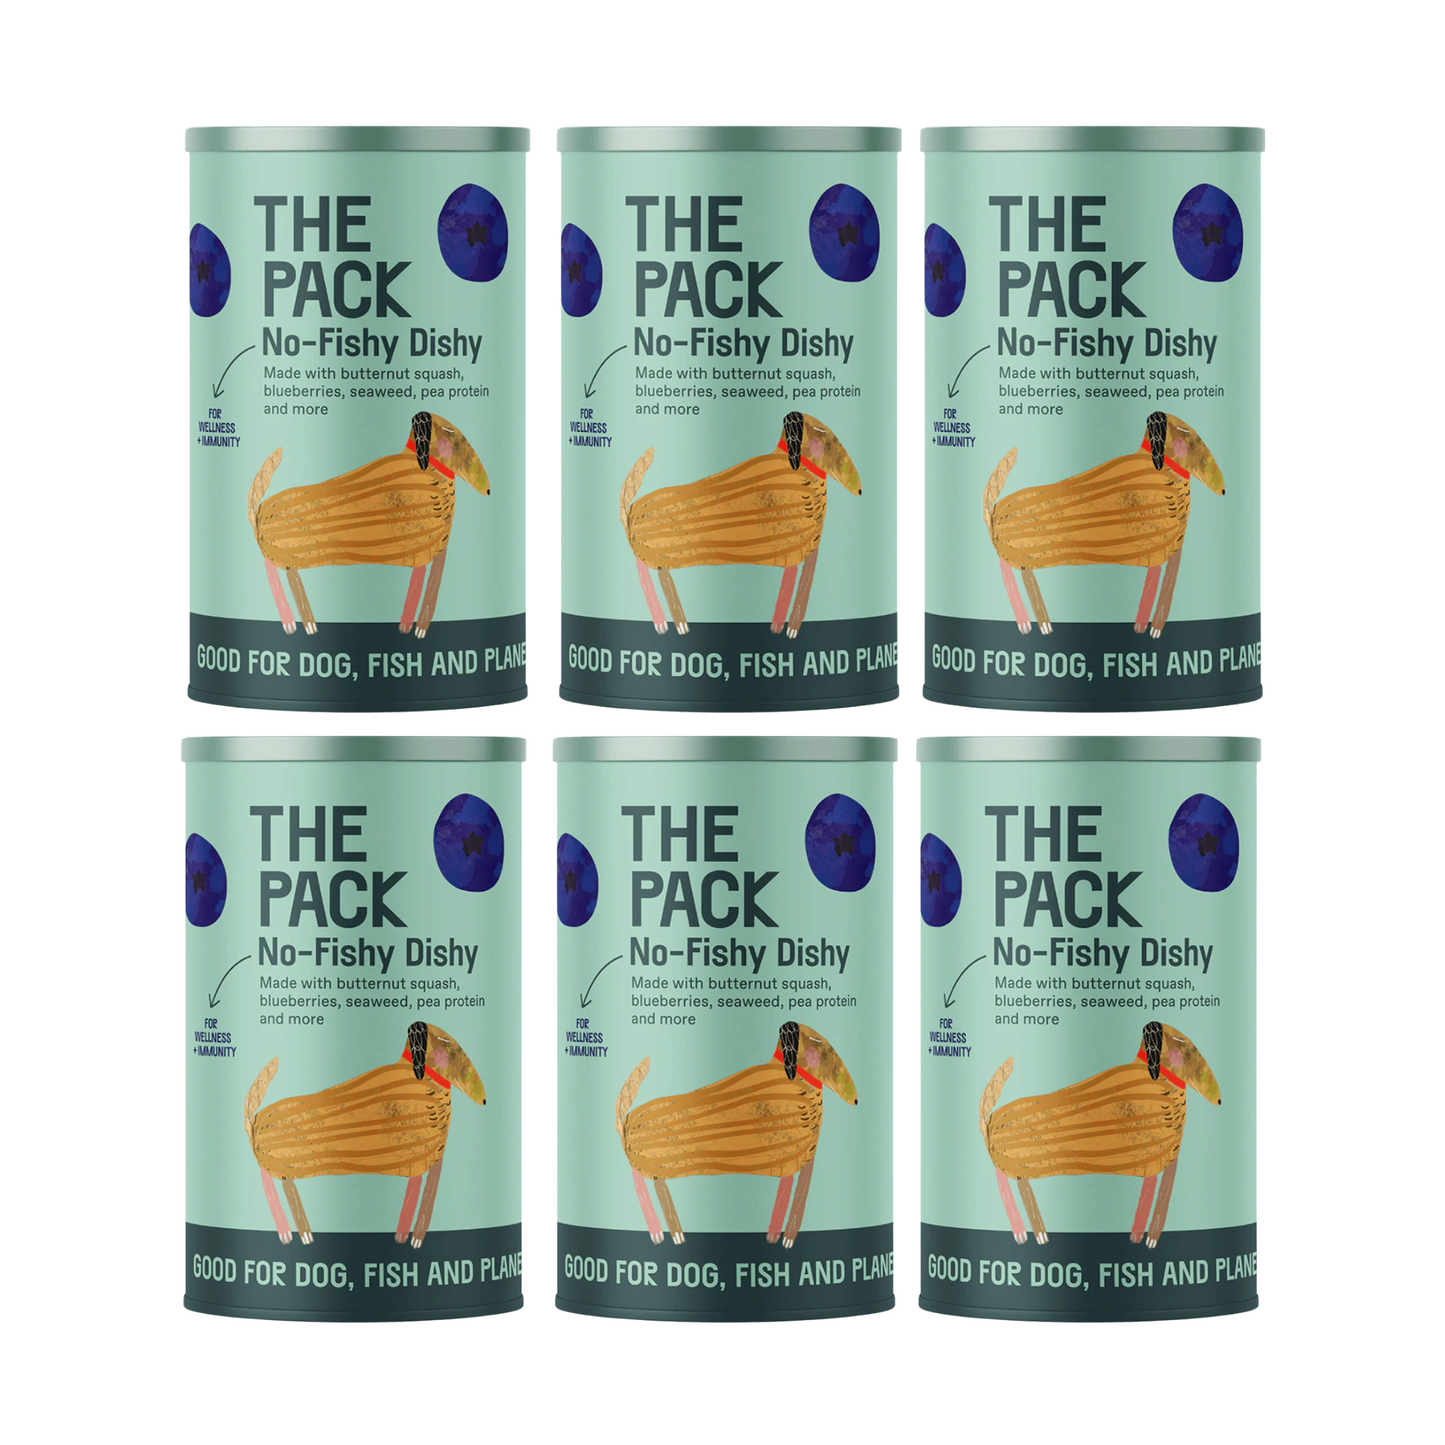 The Pack Plant Based Dog Food 100% Healthy Nutritionally Complete 375g